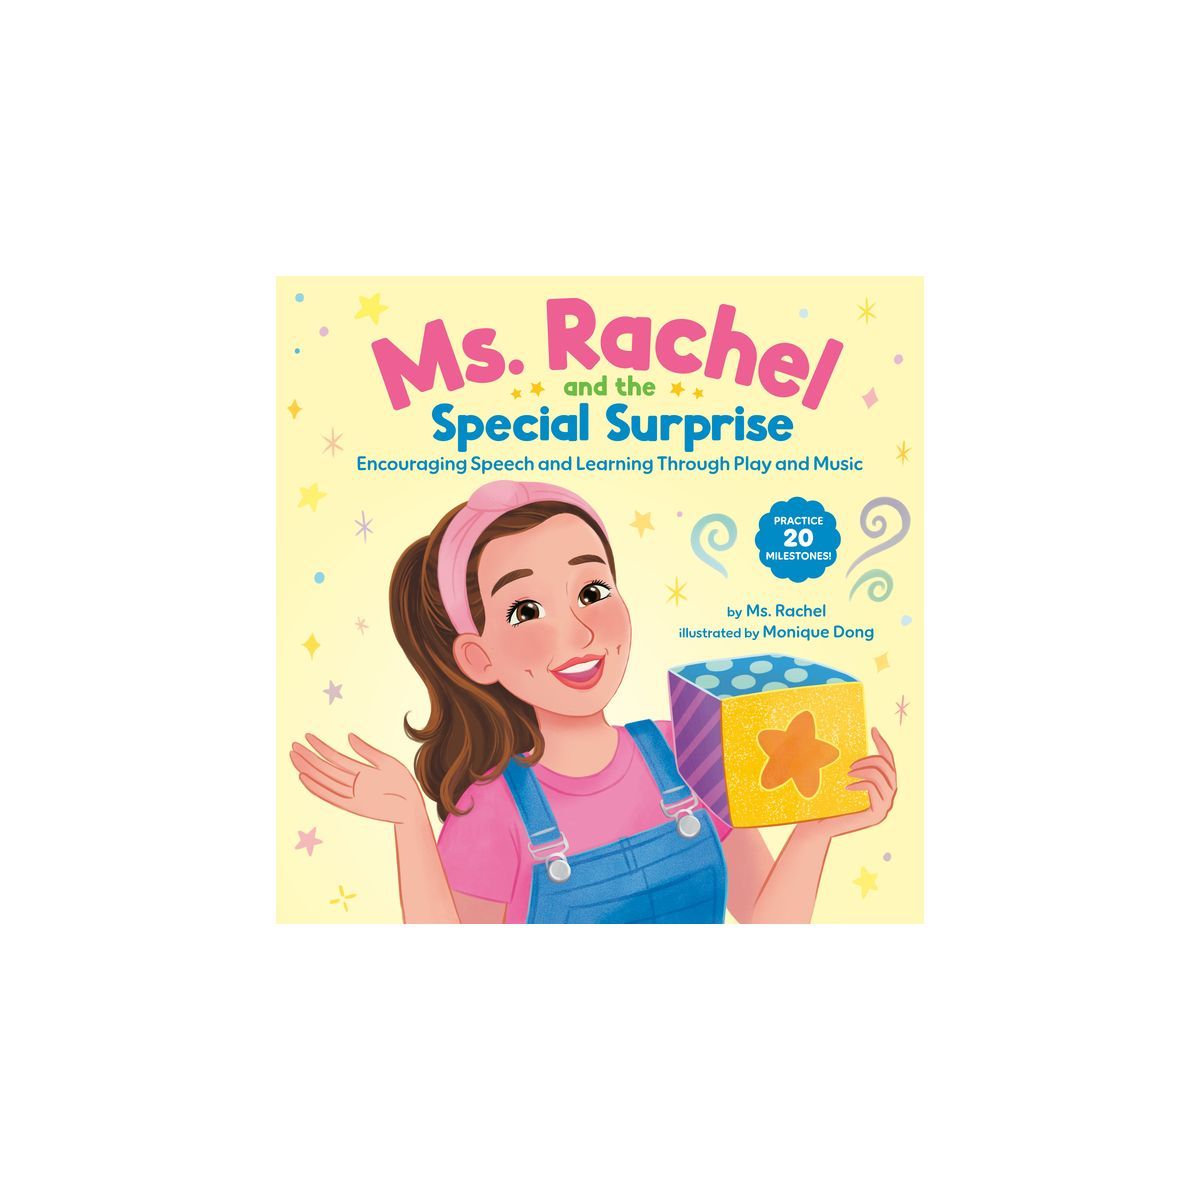 Ms. Rachel and the Special Surprise - by Ms. Rachel (Hardcover) | Target